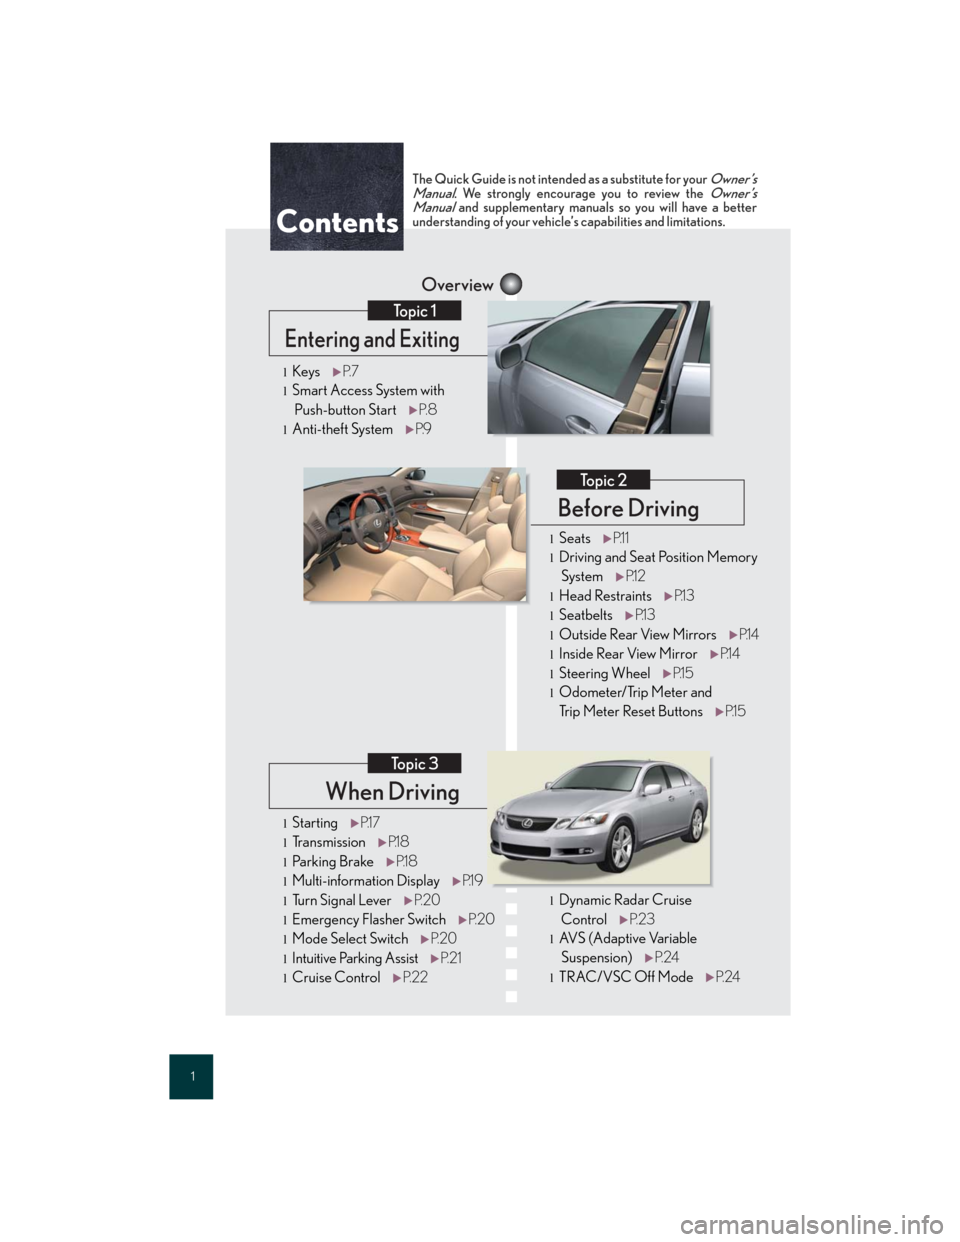 Lexus GS350 2007  Do-it-yourself maintenance / LEXUS 2007 GS430/350 QUICK REFERENCE MANUAL 1
When Driving
Topic 3
Overview
Contents
Entering and Exiting
Topic 1
Before Driving
Topic 2
lStartingP.1 7
lTransmissionP.1 8
lParking BrakeP.1 8
lMulti-information DisplayP.1 9
lTu r n  S i g n a l 